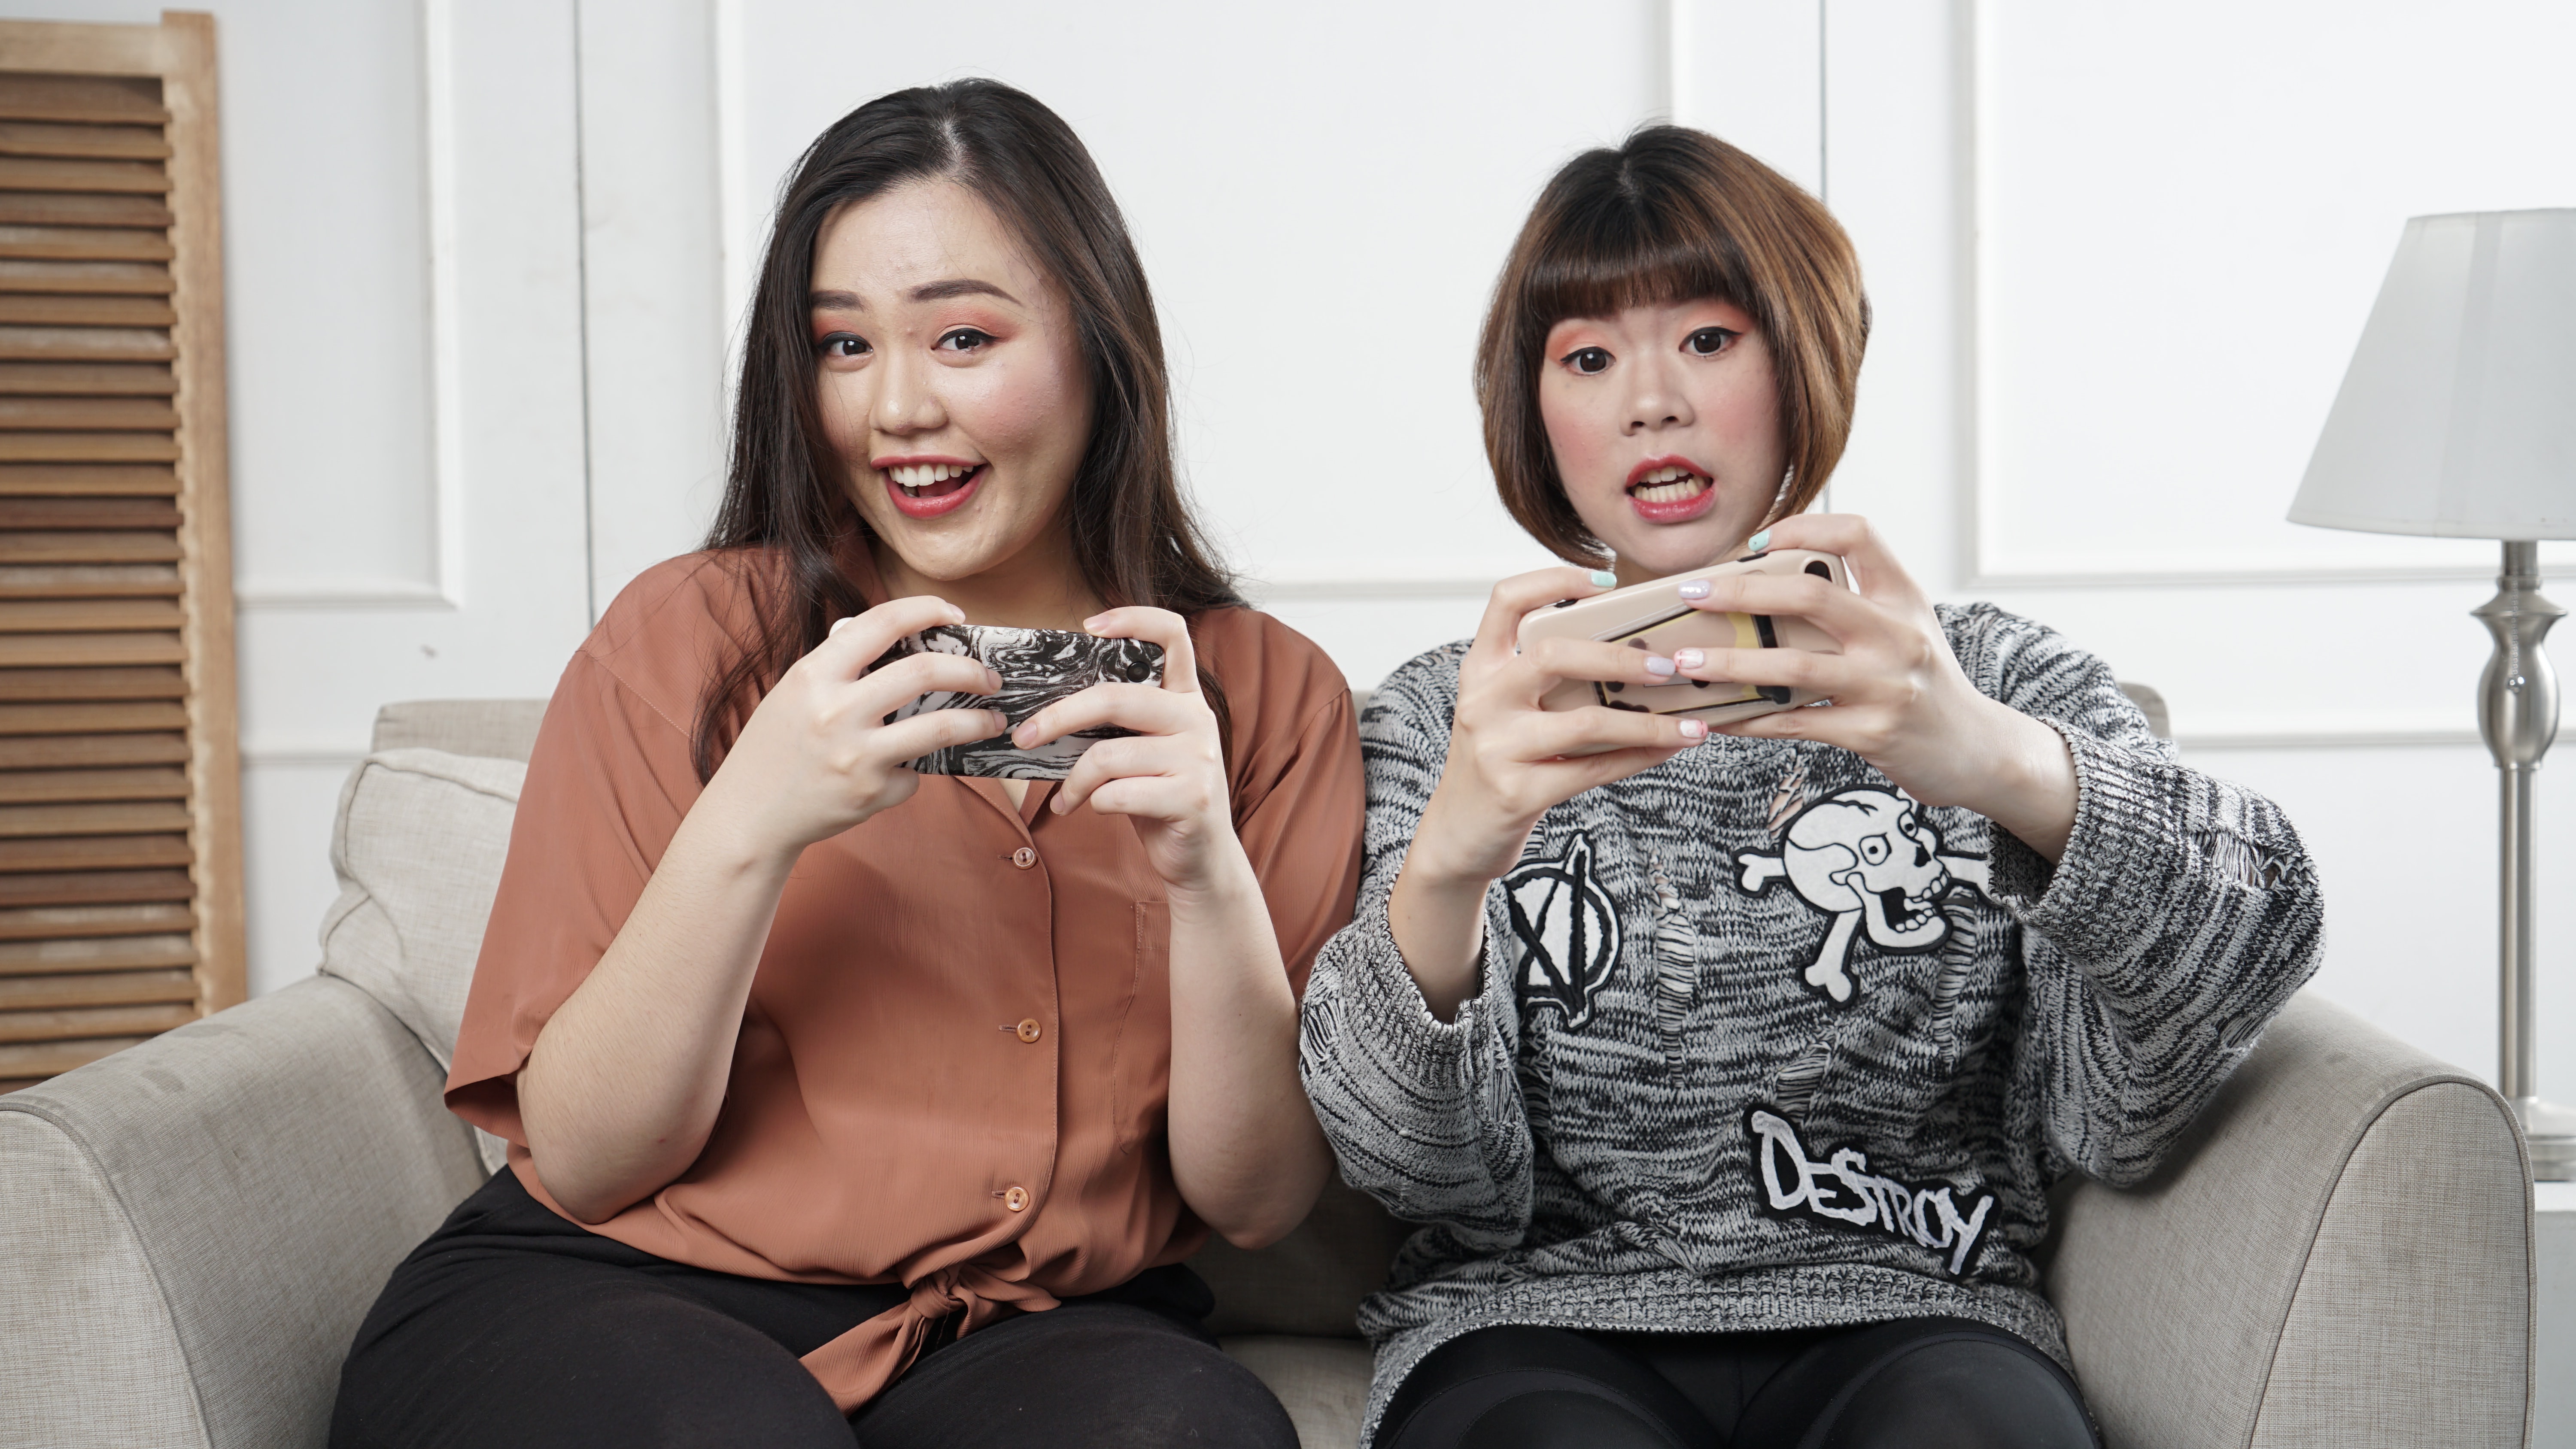 Two girls sitting on the couch and playing online games